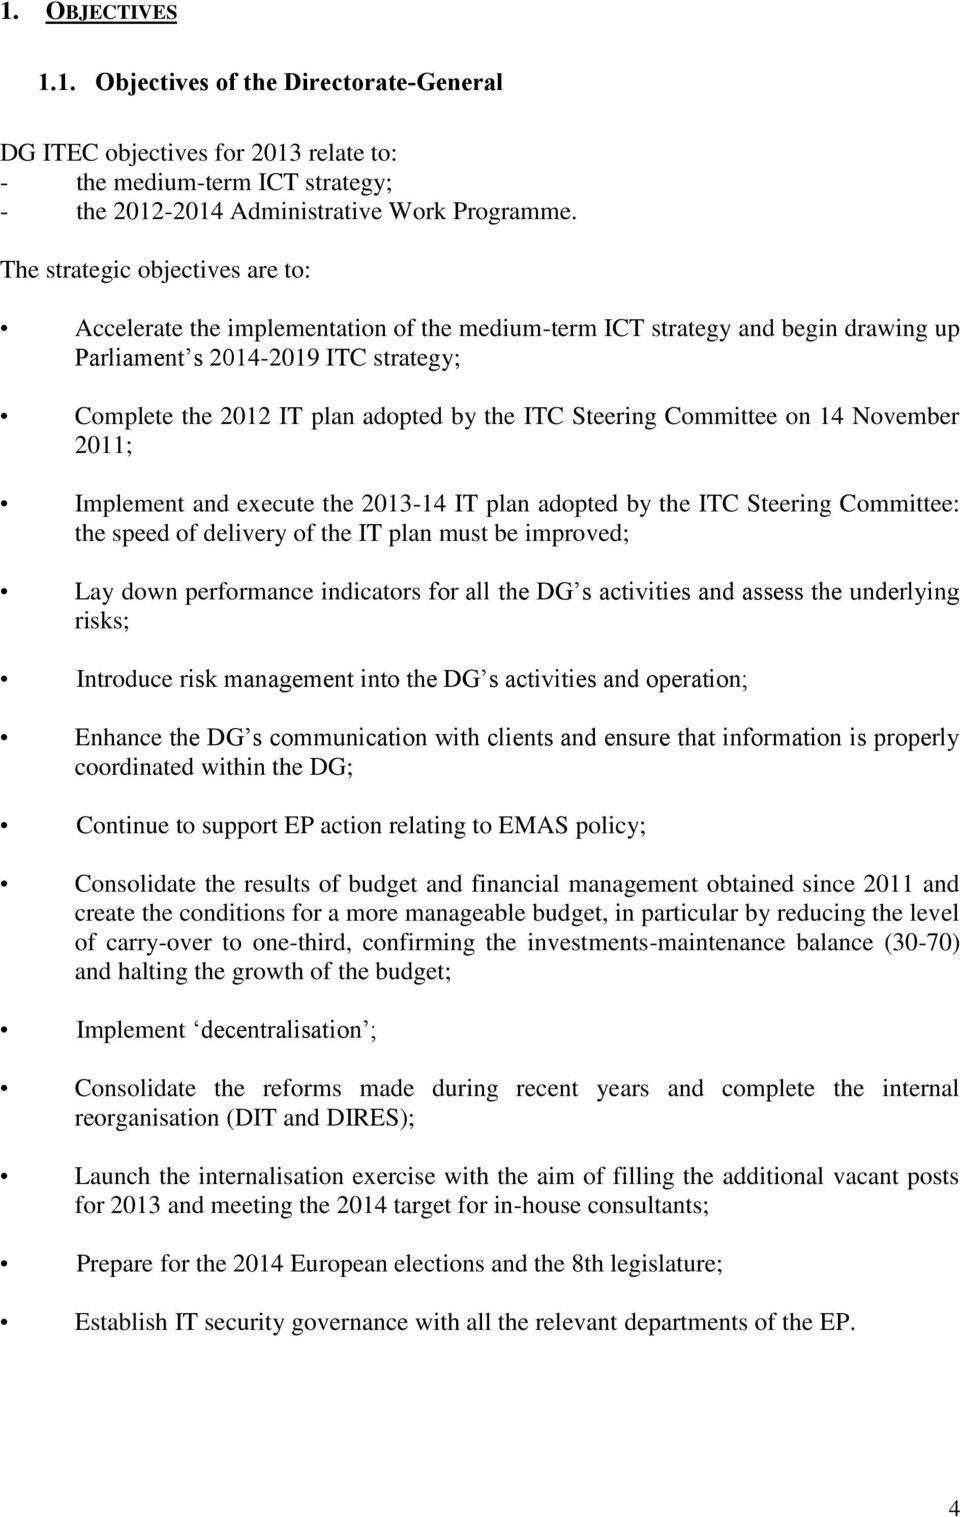 Steering Committee on 14 November 2011; Implement and execute the 2013-14 IT plan adopted by the ITC Steering Committee: the speed of delivery of the IT plan must be improved; Lay down performance